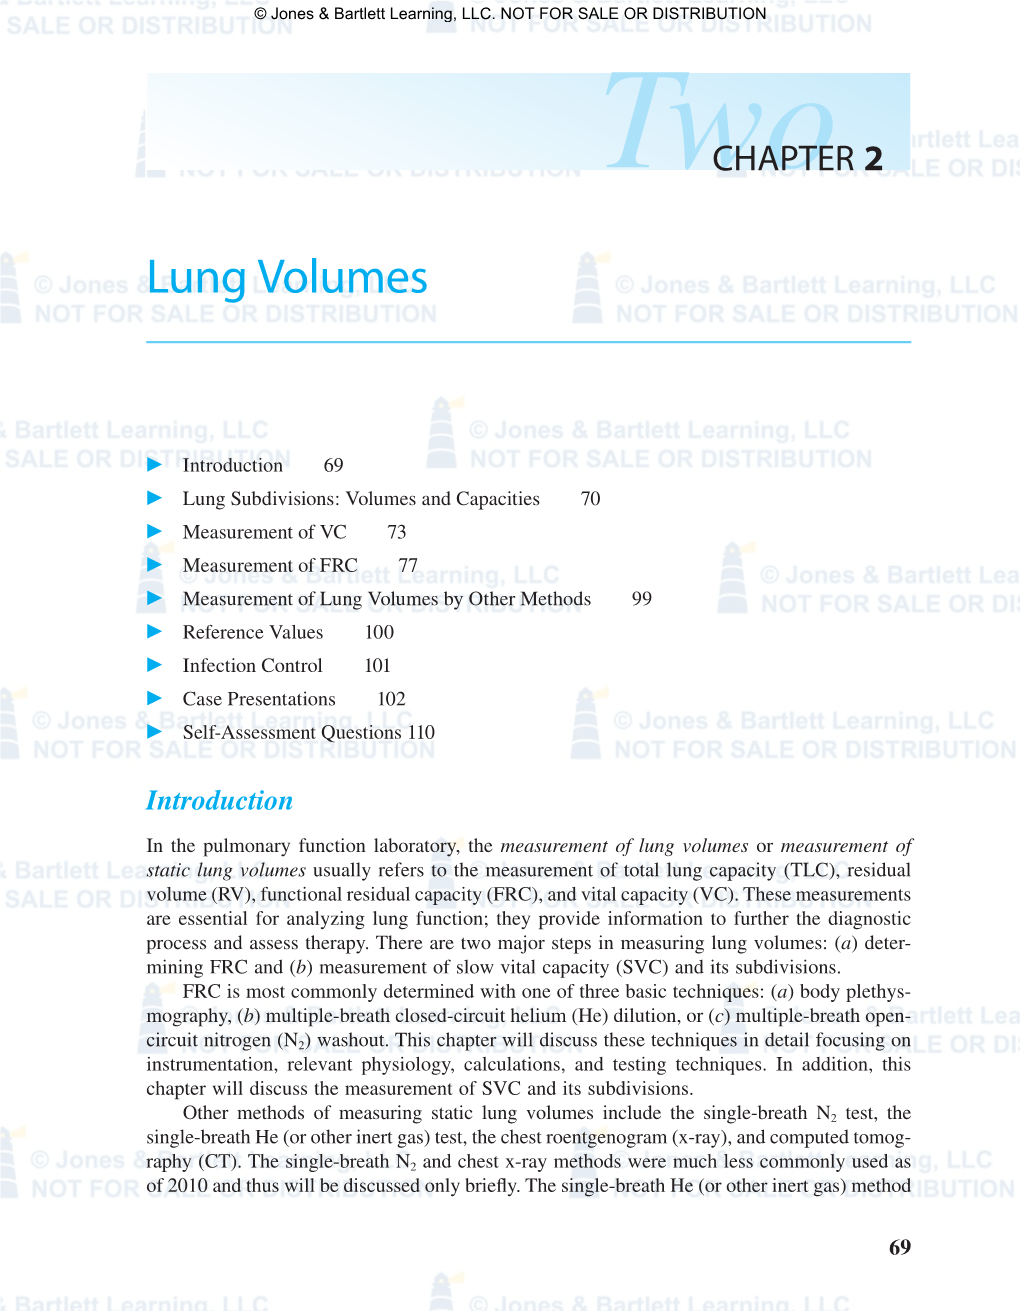 Lung Volumes